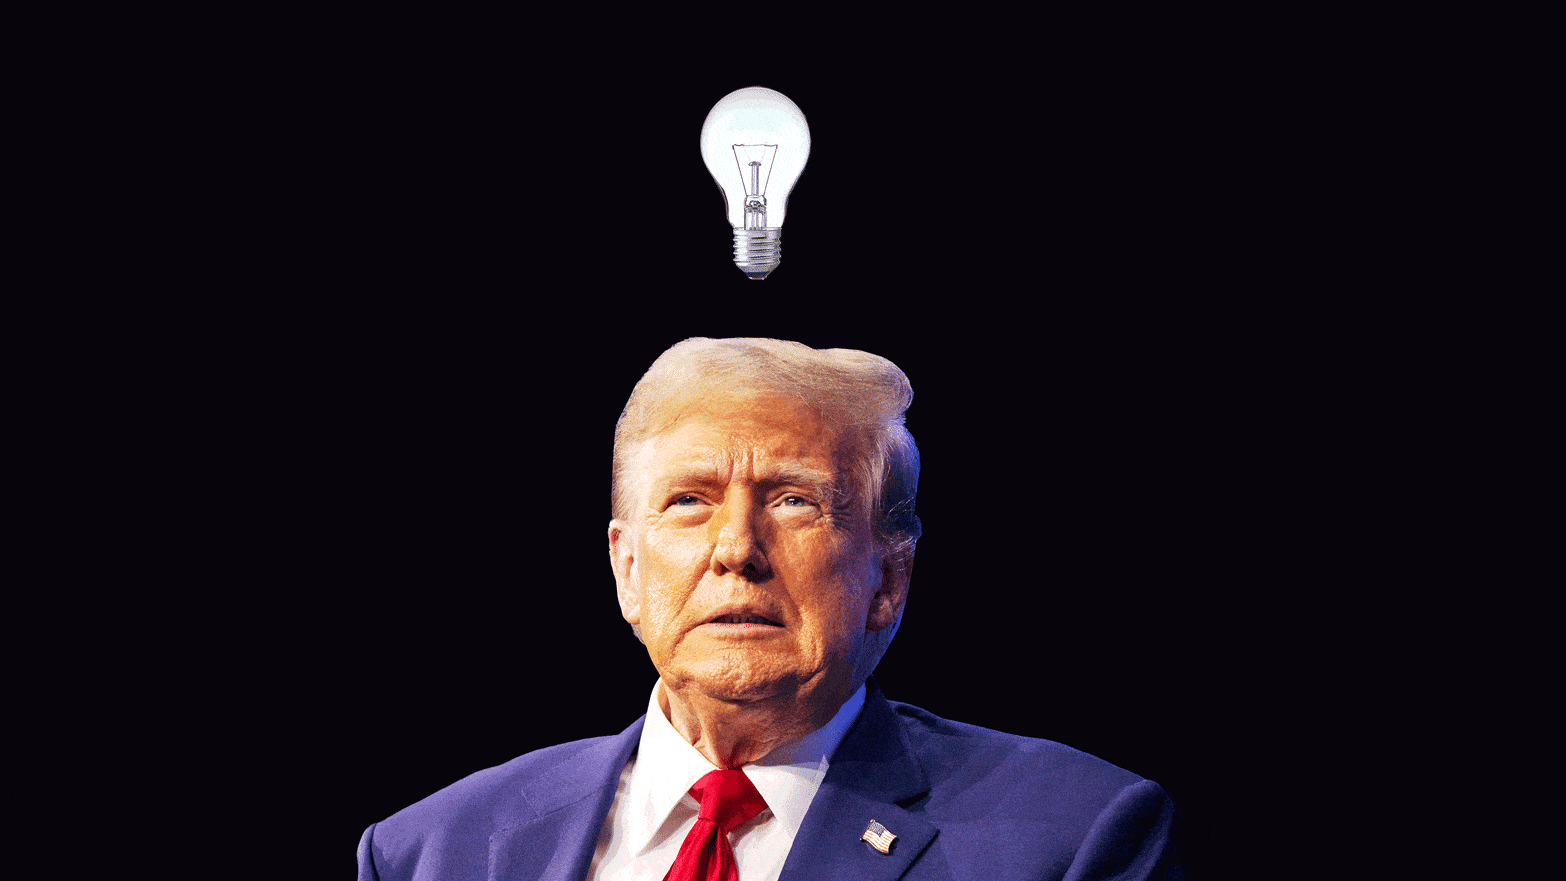 A photo illustration of Donald Trump with a light bulb flickering above